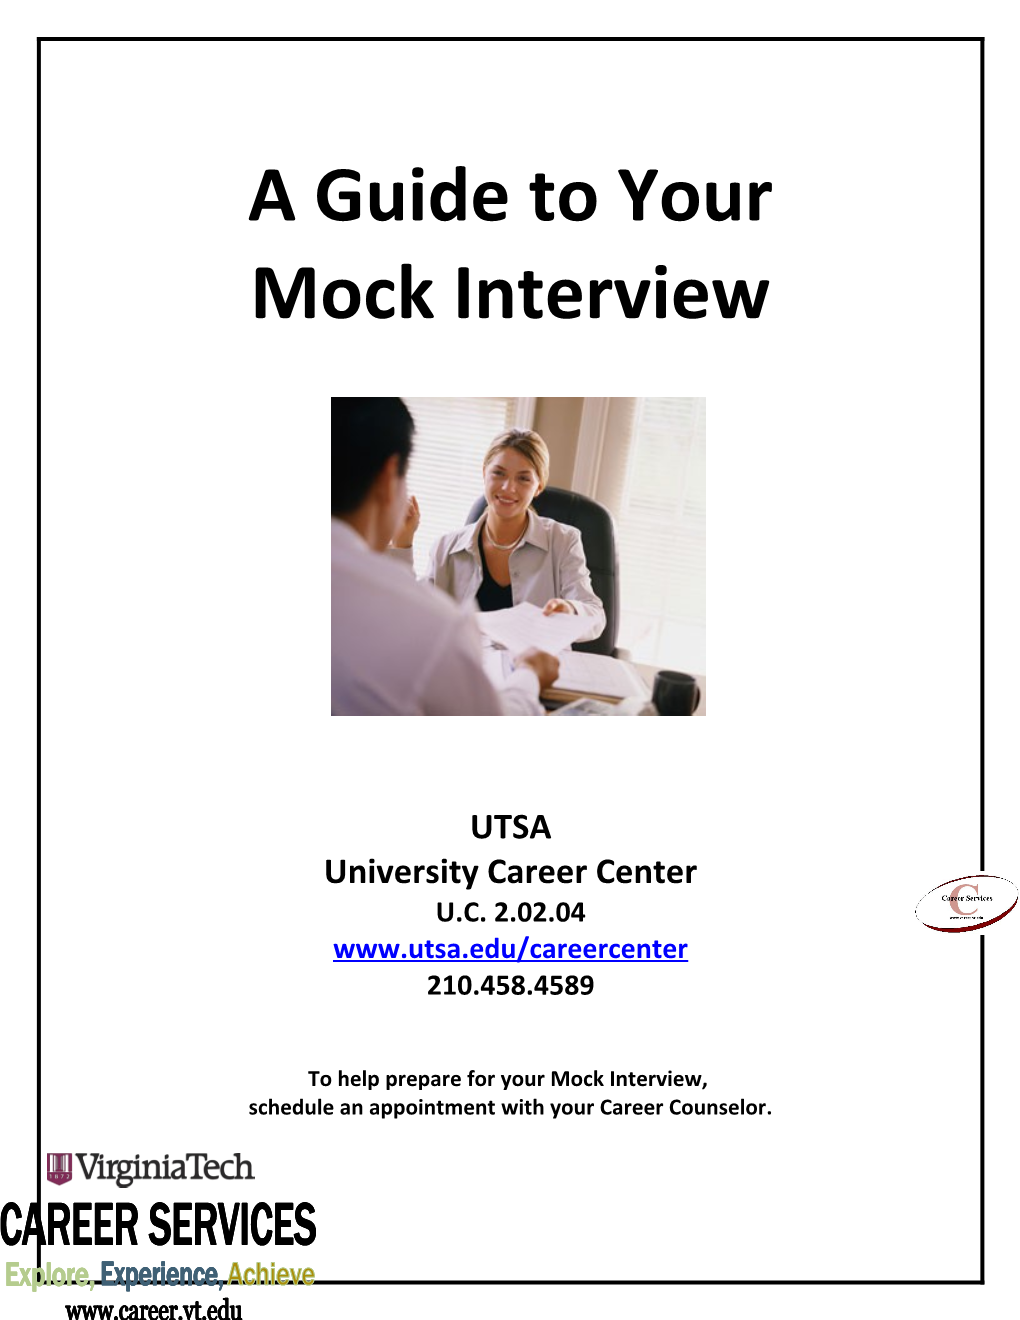 A Guide to Your Mock Interview